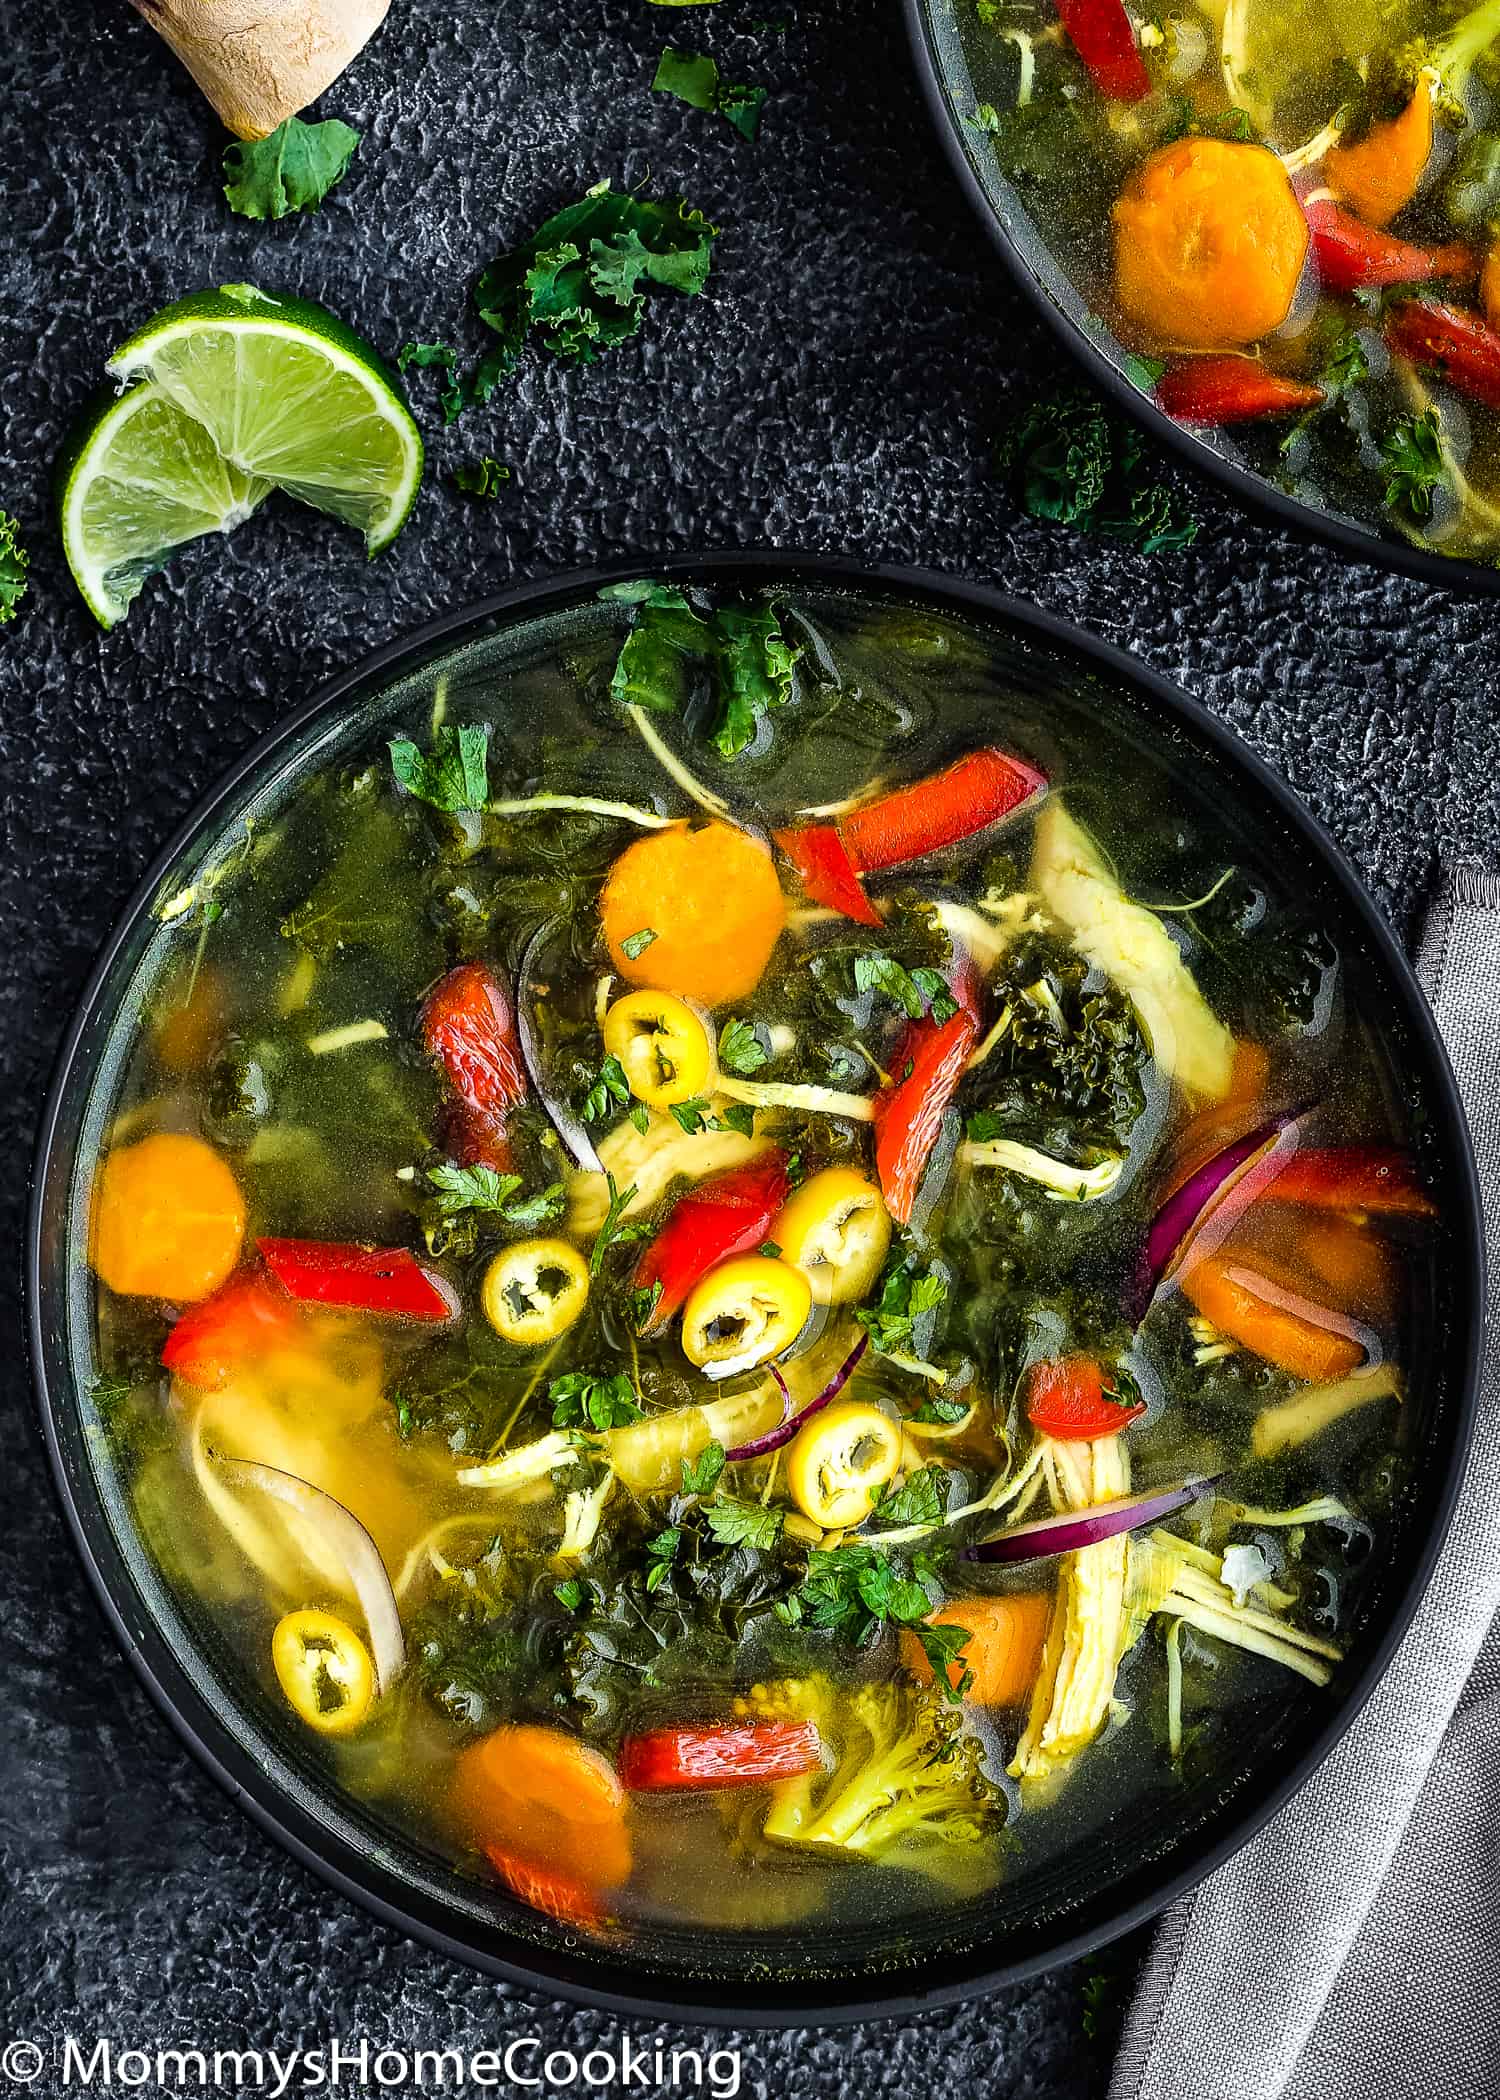 one bowl with detox soup.